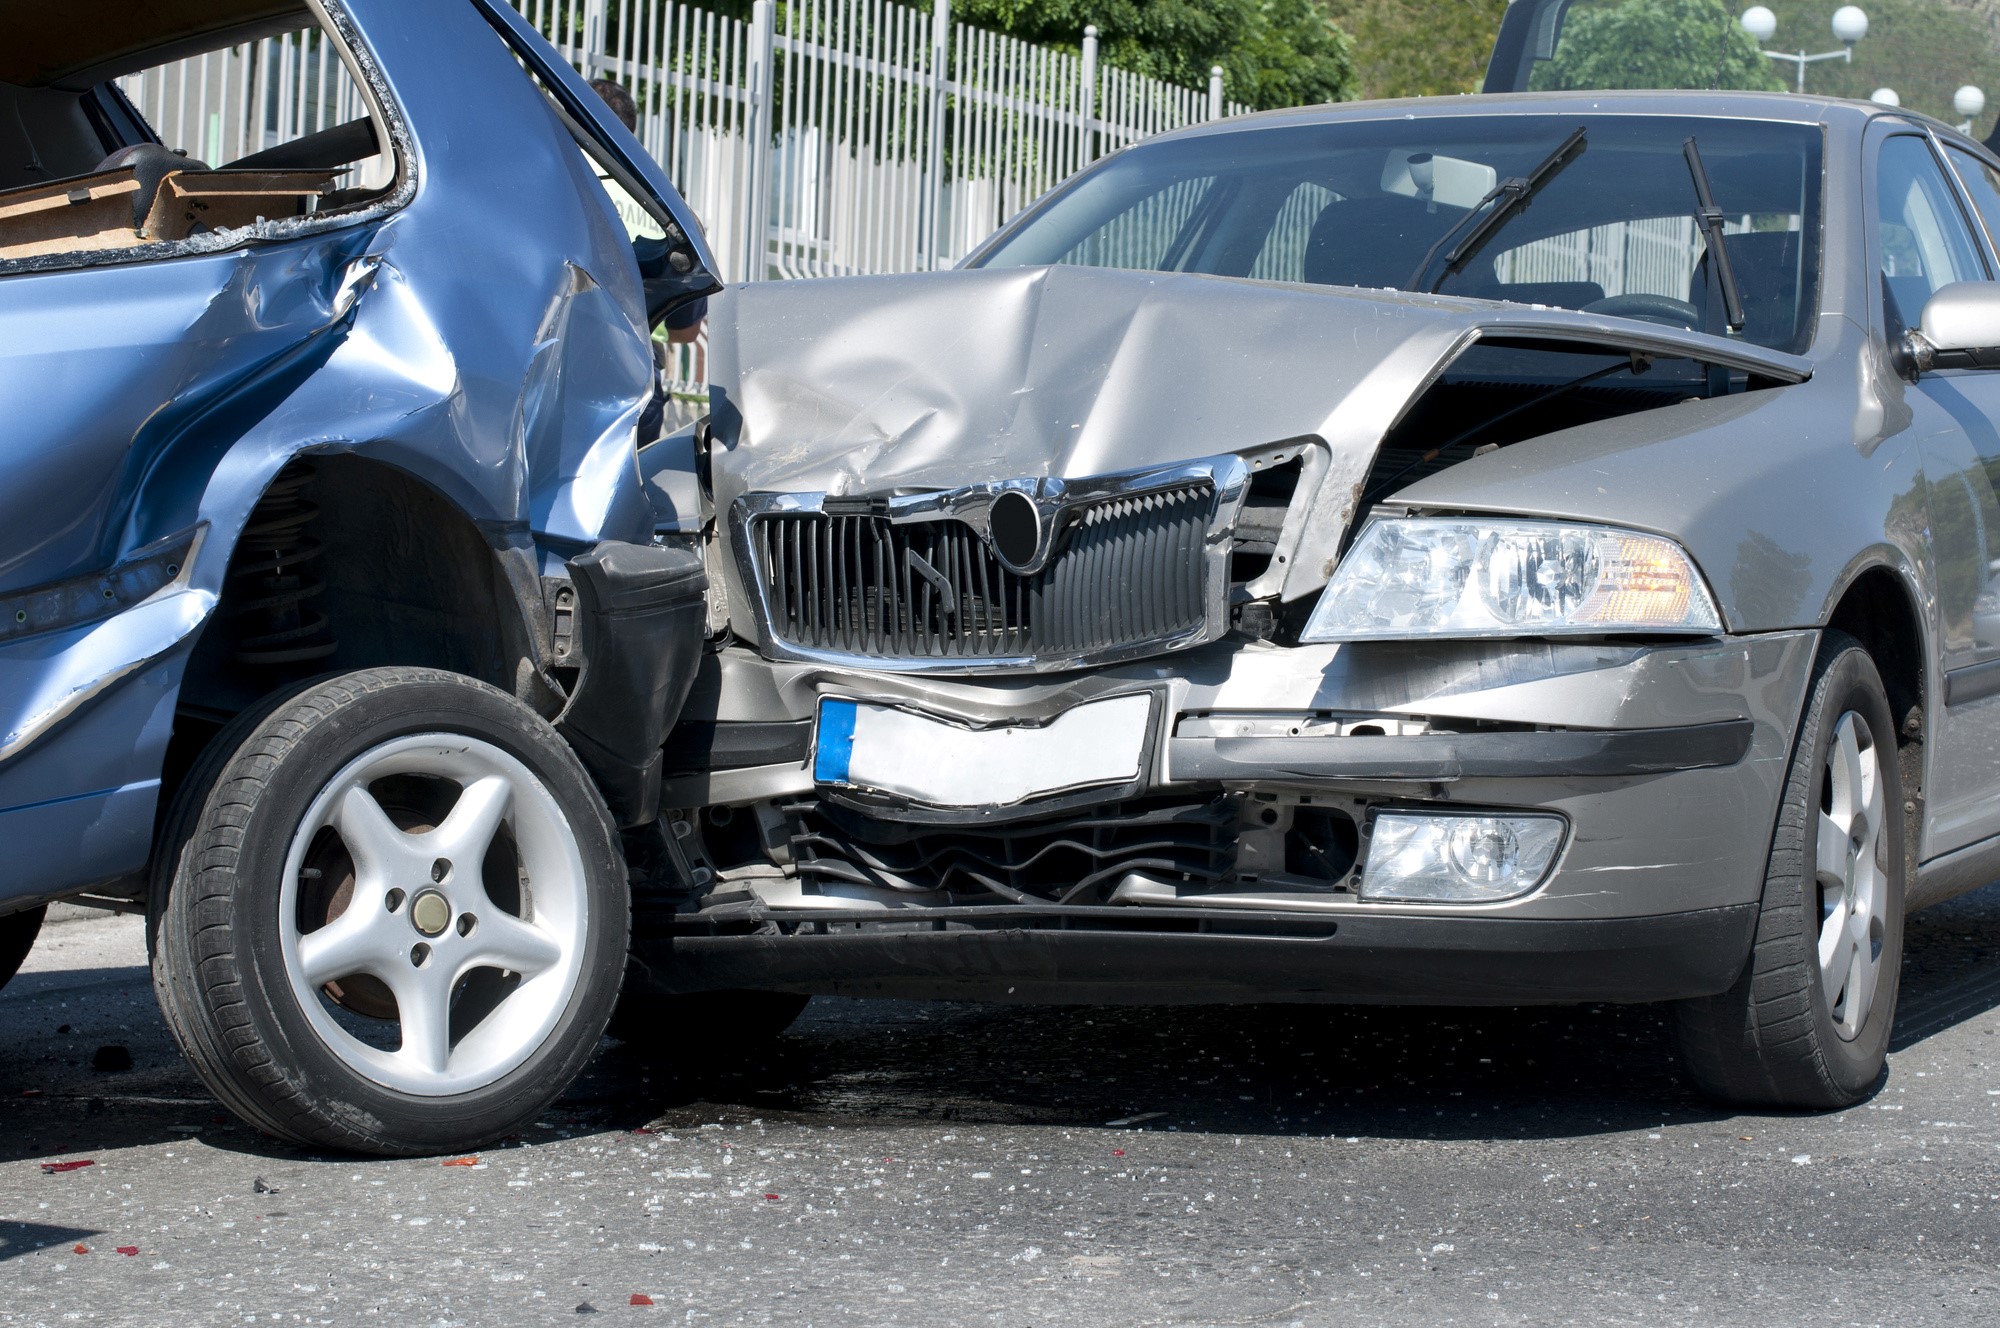 The Important Steps to Take Following a Motor Vehicle Accident